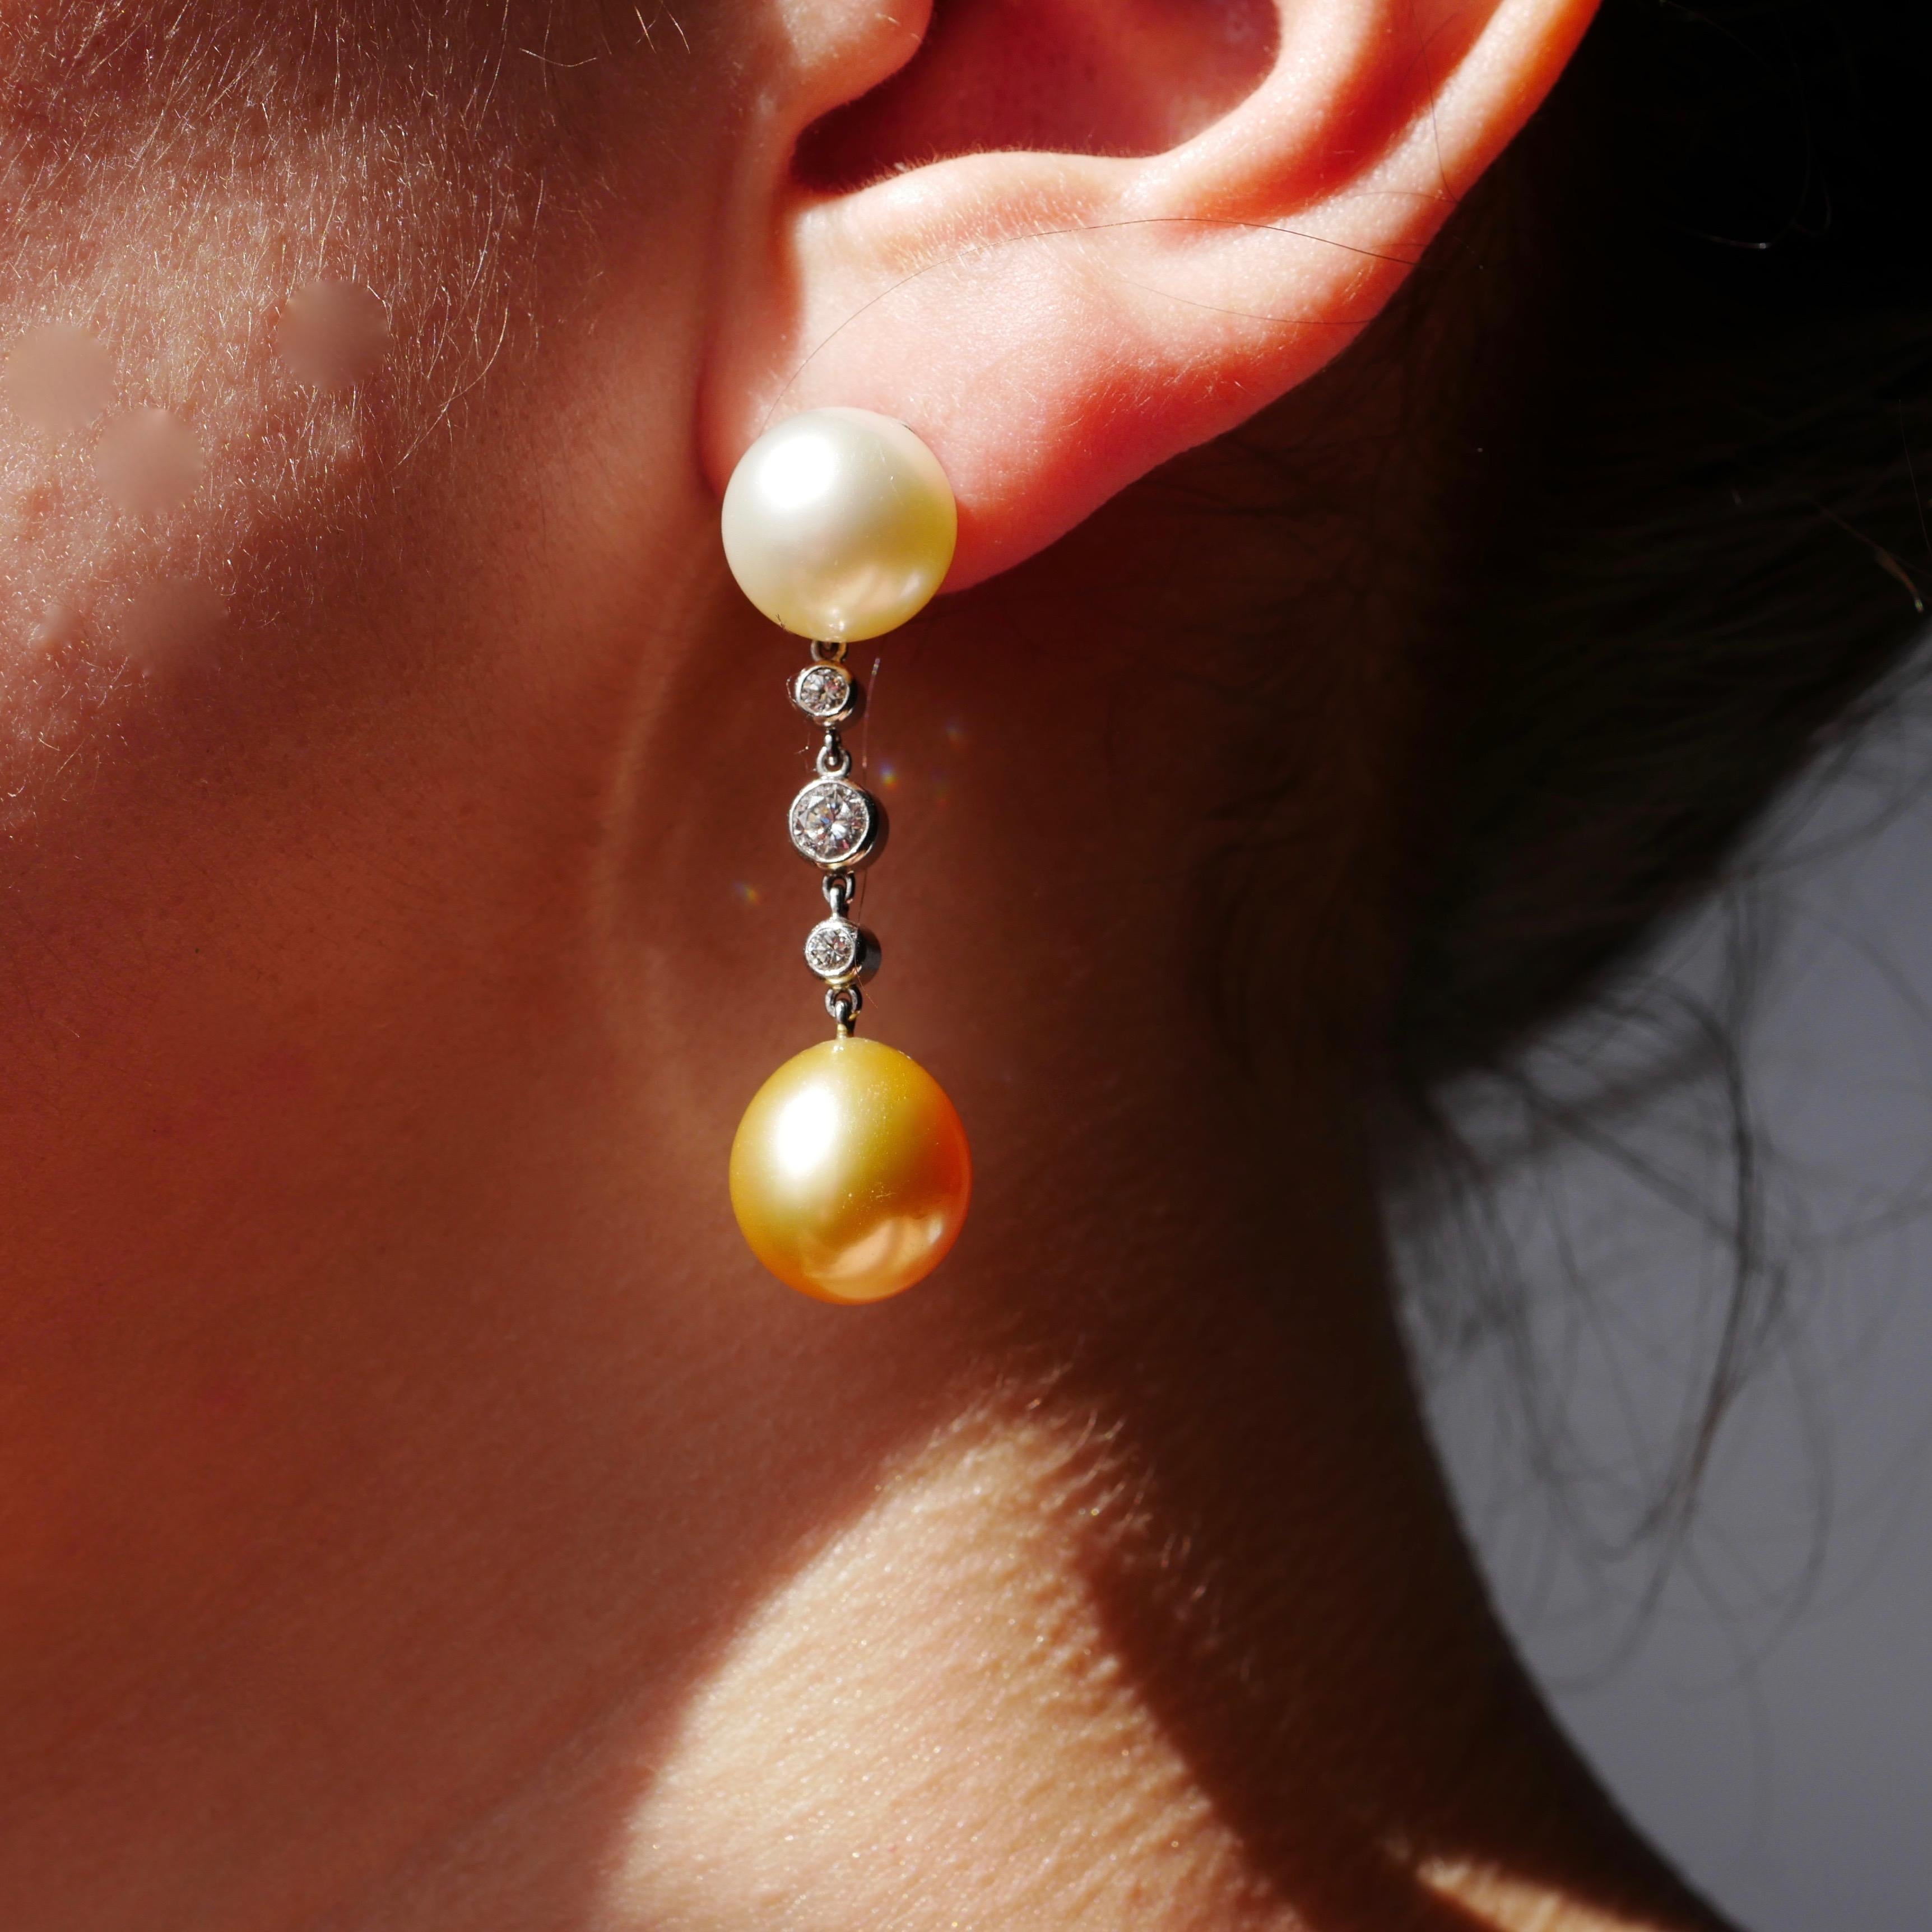 18k White Gold

Golden South Sea Cultured Pearls

Soft White South Cultured Sea Pearls 

.50ct Diamonds

H Colour VS Clarity 

A Beautiful Pair of Asymmetric Drop Earrings 

The soft white South Sea pearls and Golden South Sea pearls are between